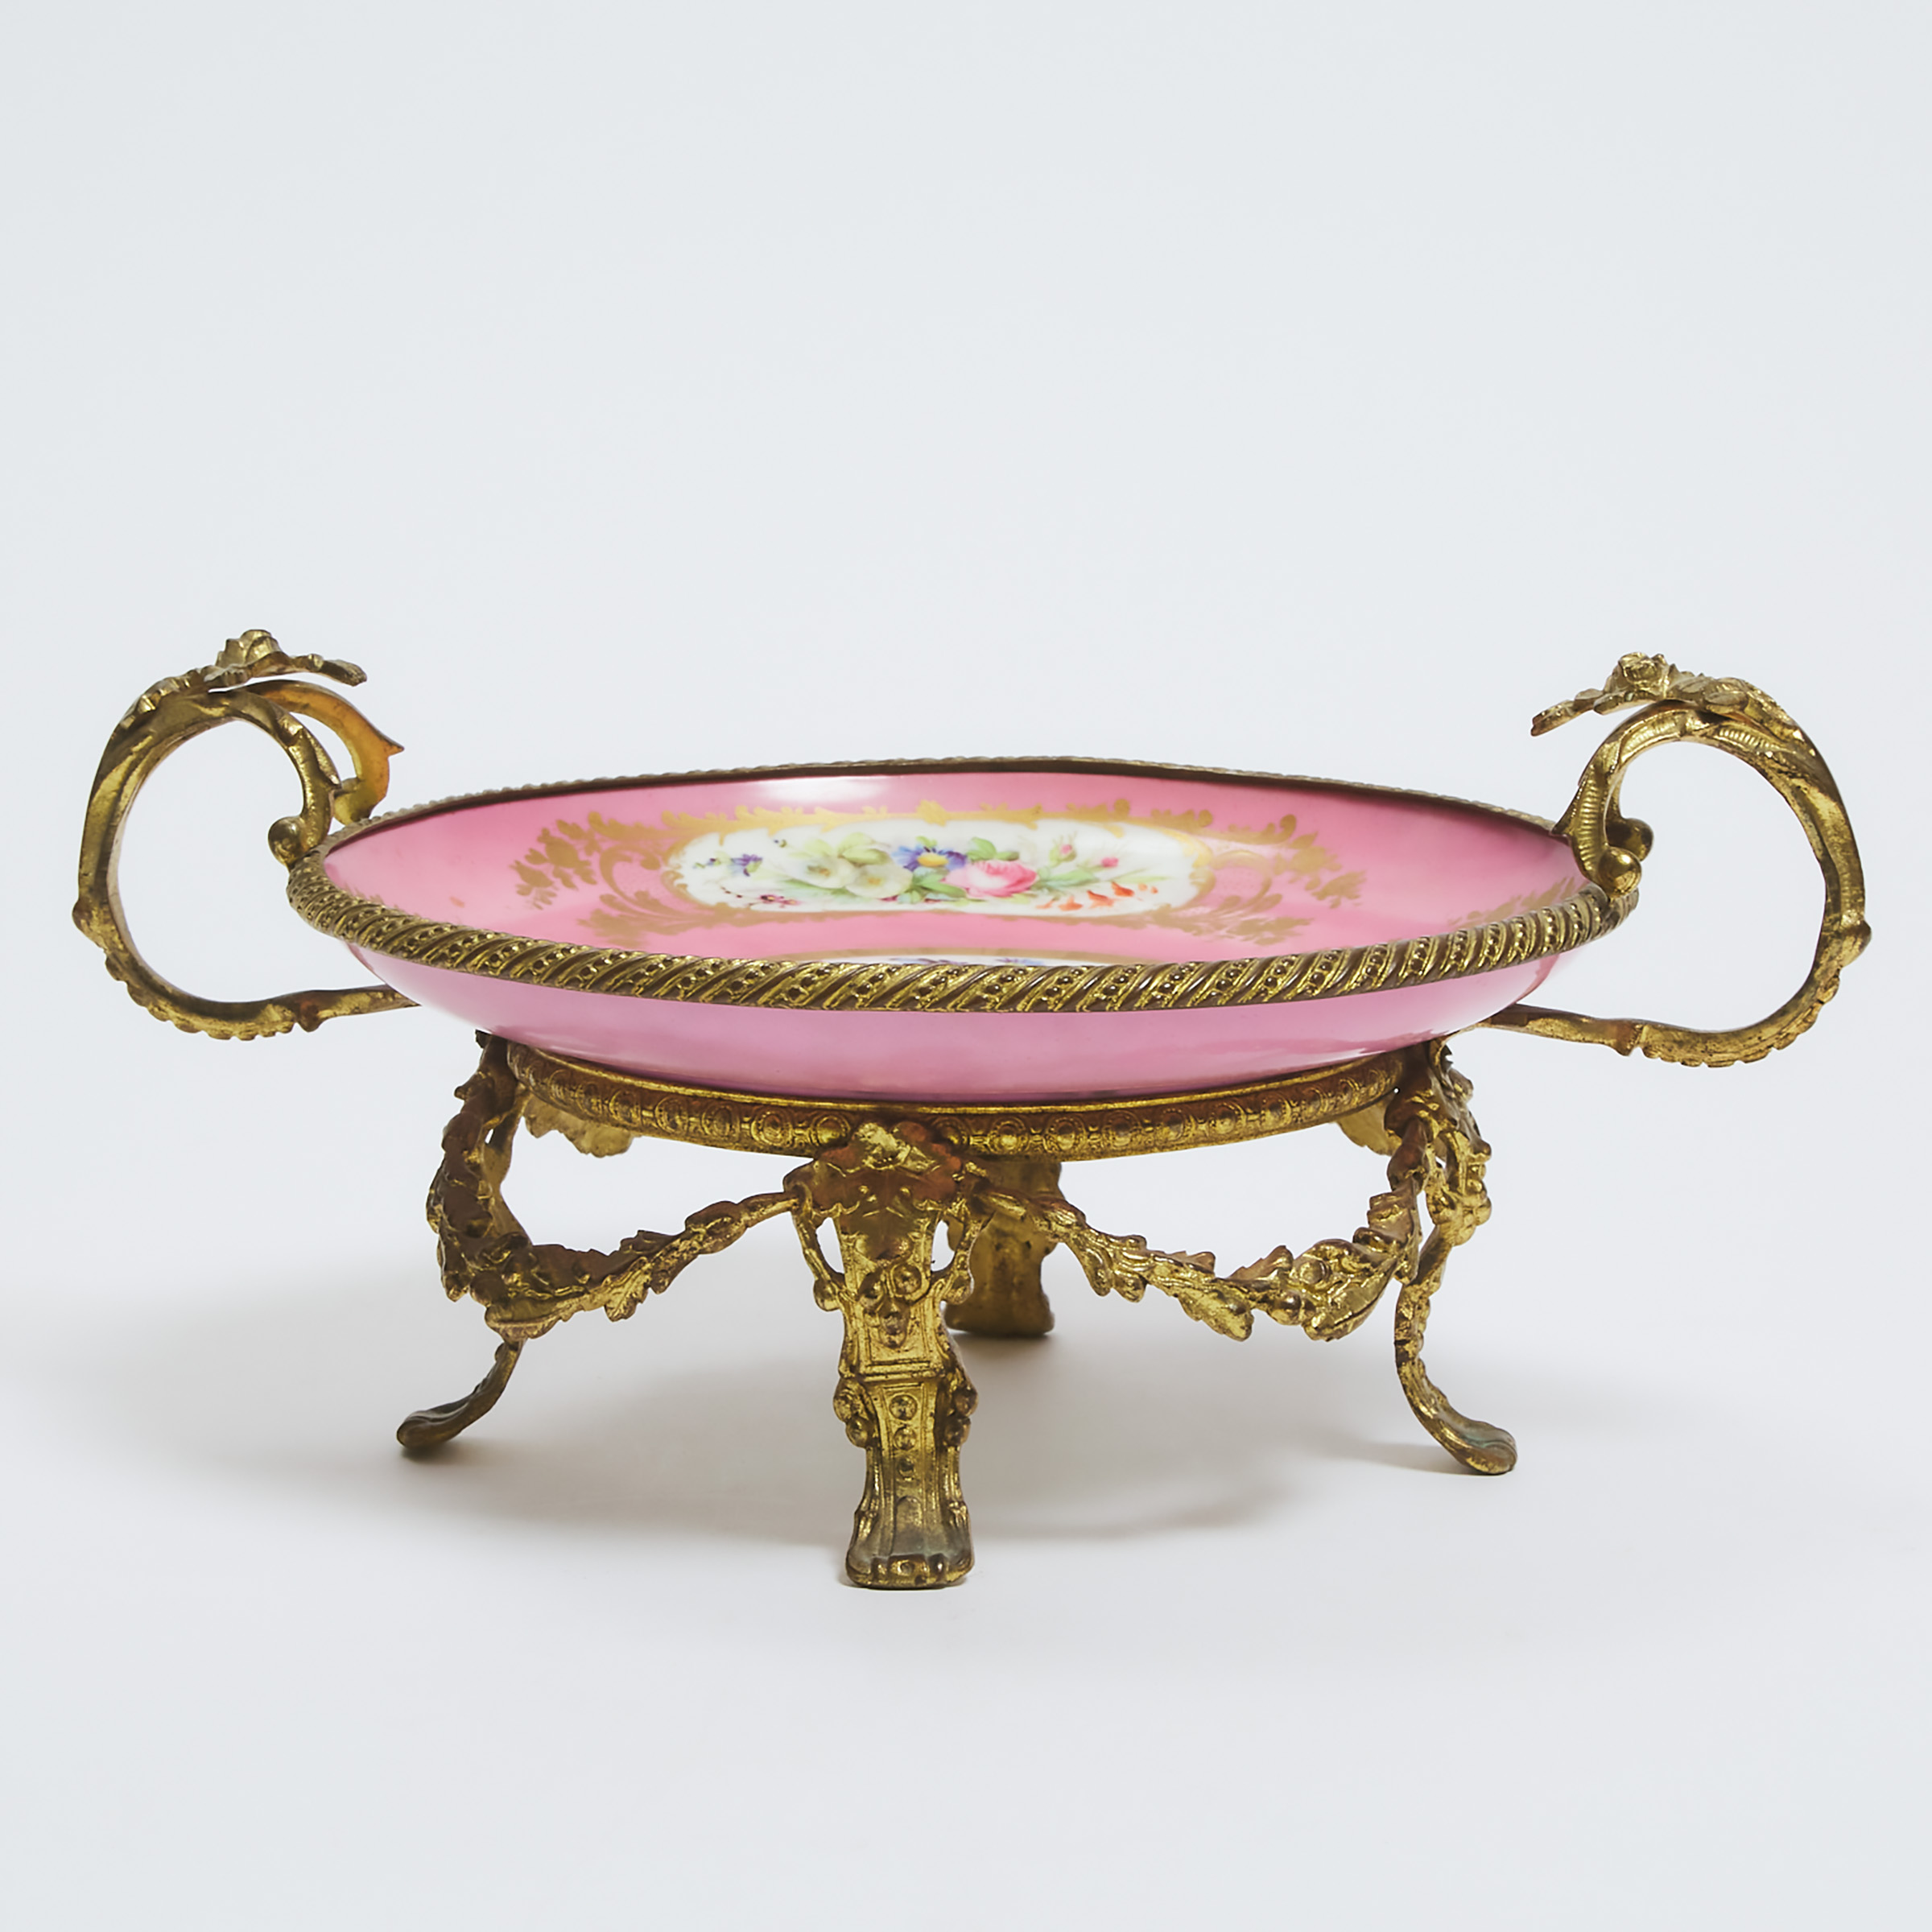 Ormolu Mounted 'Sèvres' Pink Ground Comport, late 19th century